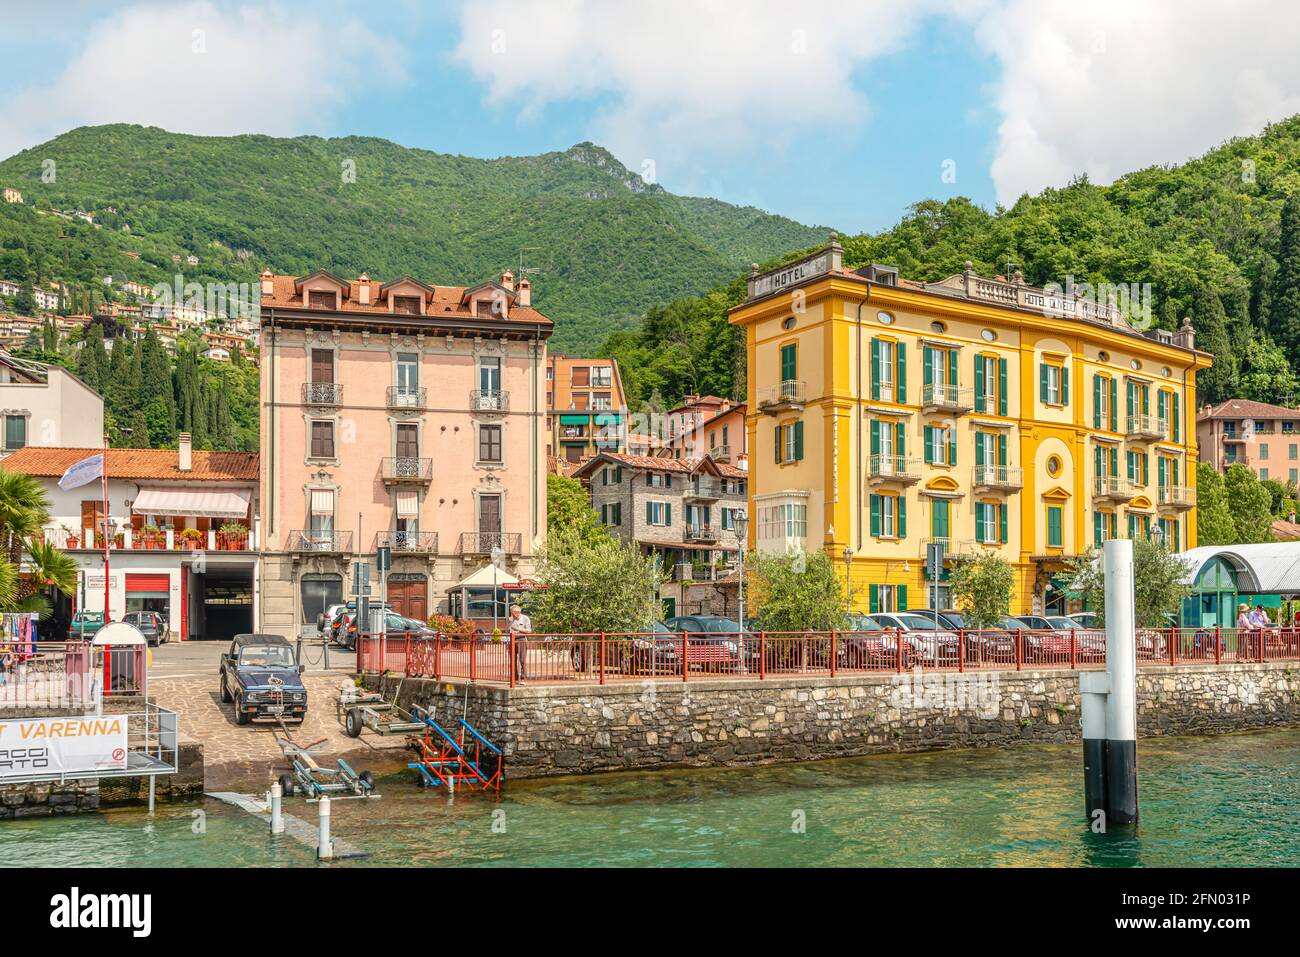 Waterfront of Varenna at Lake Como seen from the lakeside, Lombardy, Italy Stock Photo